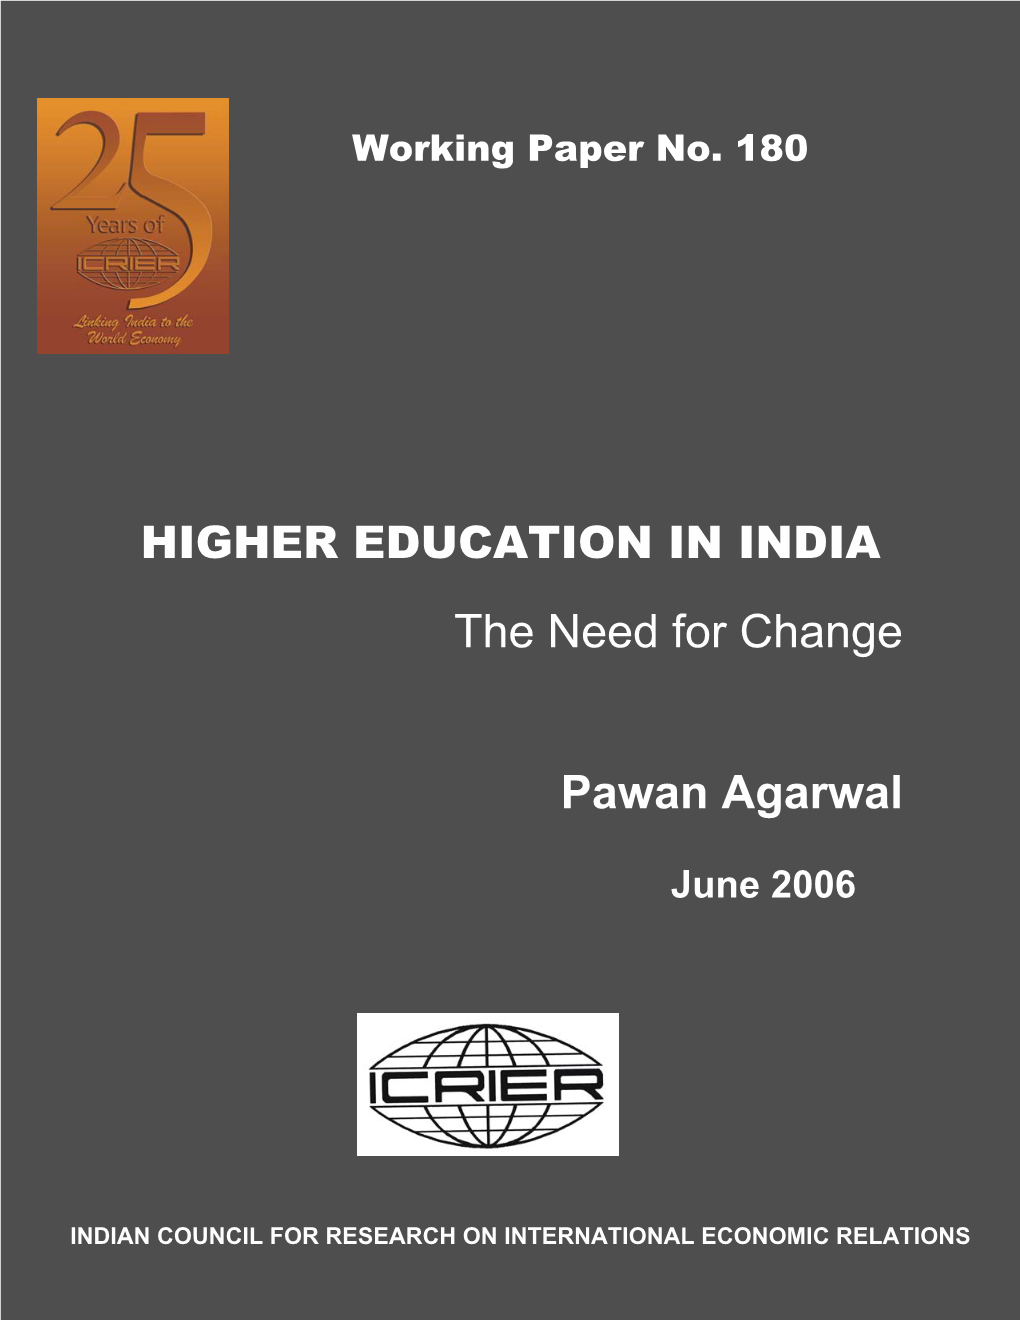 Higher Education in India: the Need for Change, Pawan Agarwal, June